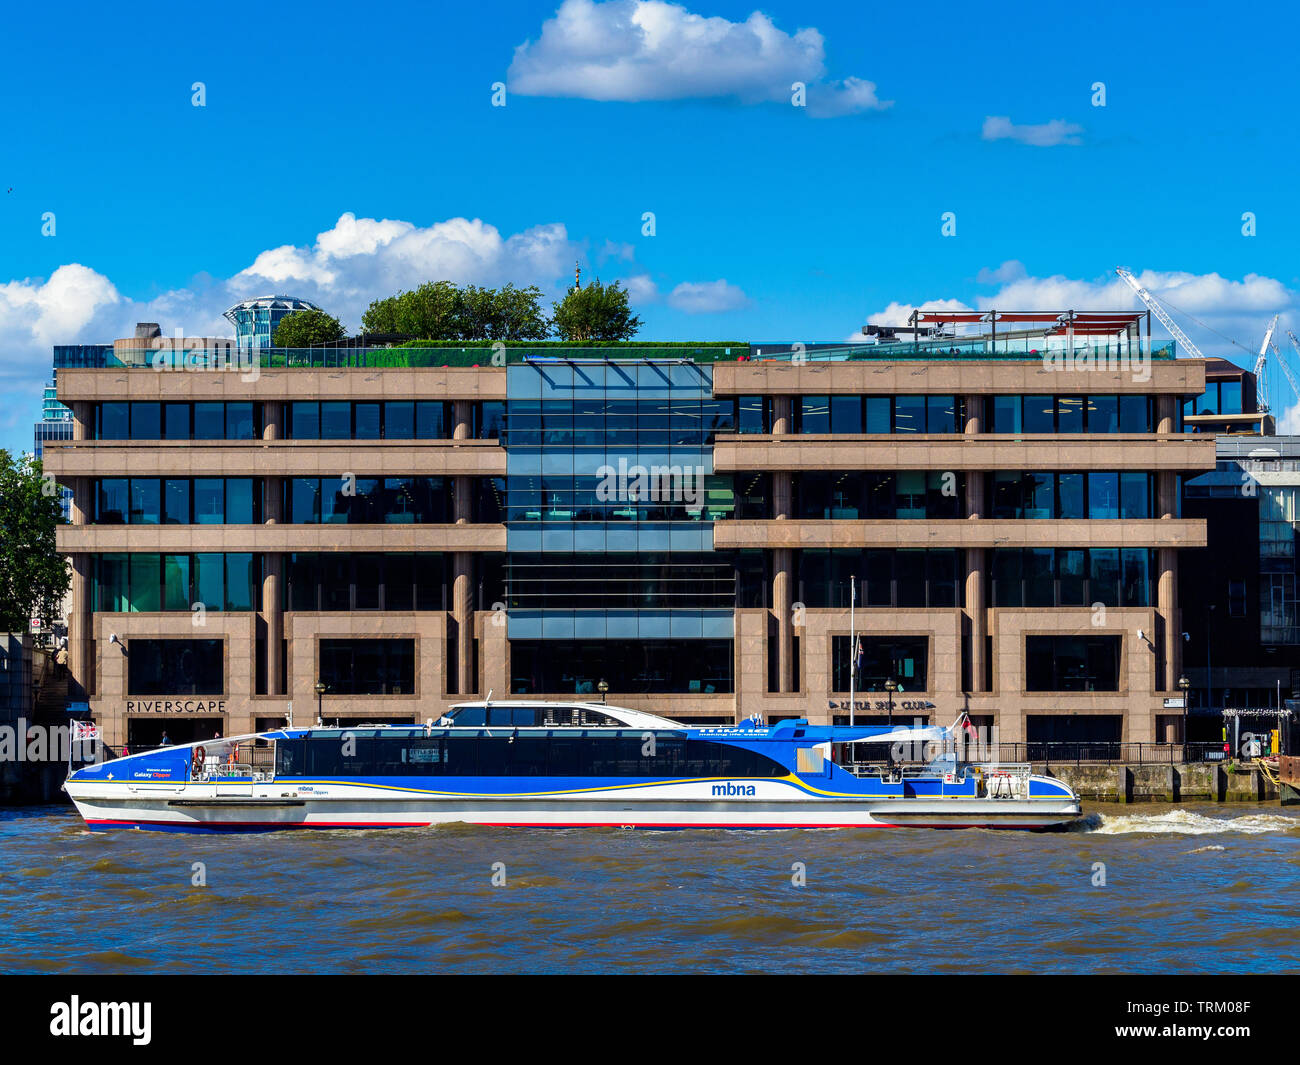 Riverscape Building London - refurbished 1980s office building on the banks of the River Thames, refurbishment architects Barr Gazetas. Thames Clipper. Stock Photo